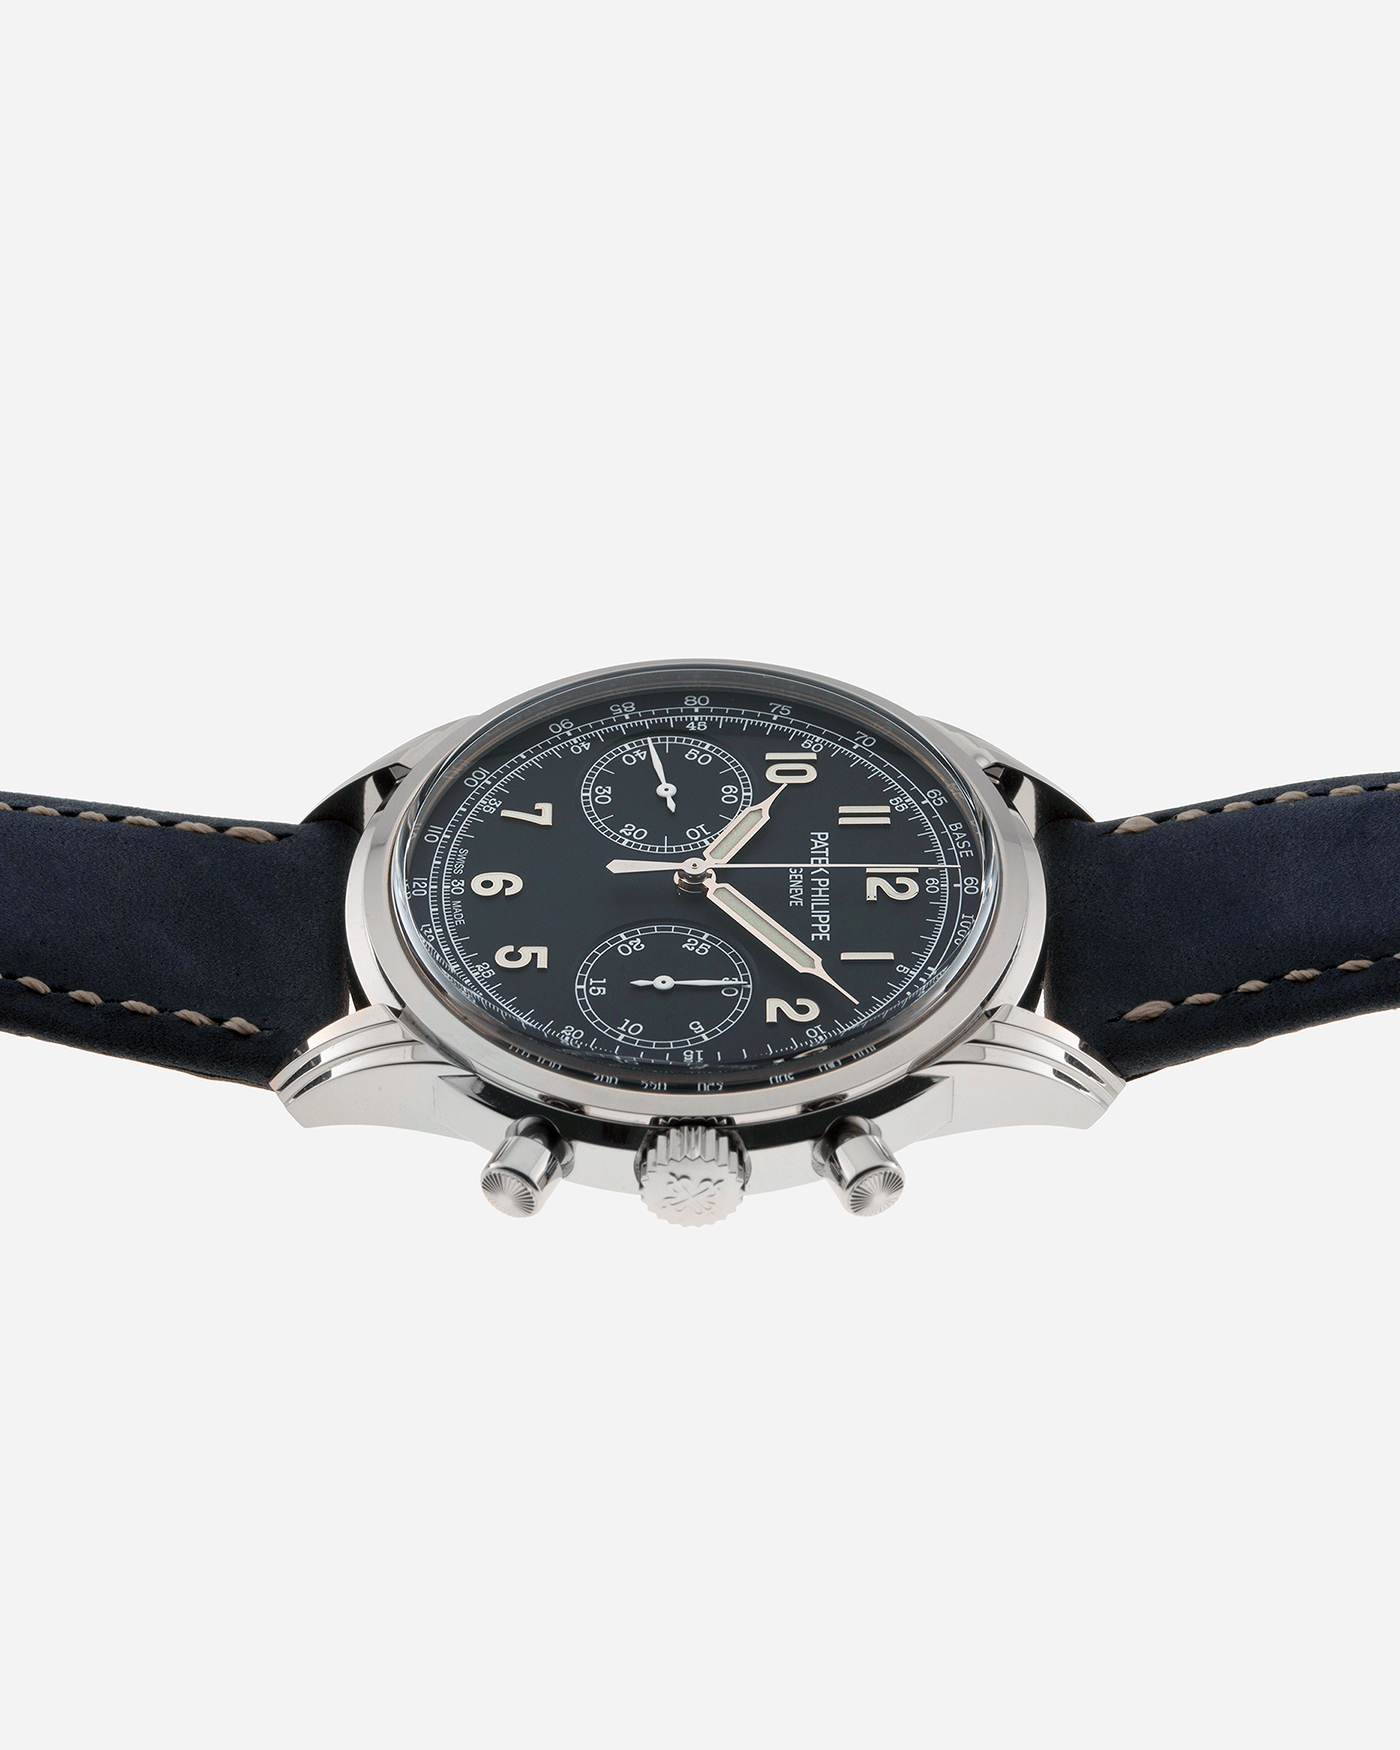 Brand: Patek Philippe Year: 2021 Model: Chronograph Reference Number: 5172G Material: White Gold Movement: In-House Caliber CH 29-535 PS Case Diameter: 41mm Bracelet: Patek Philippe Navy Blue Calfskin Strap with White Gold Deployant Clasp